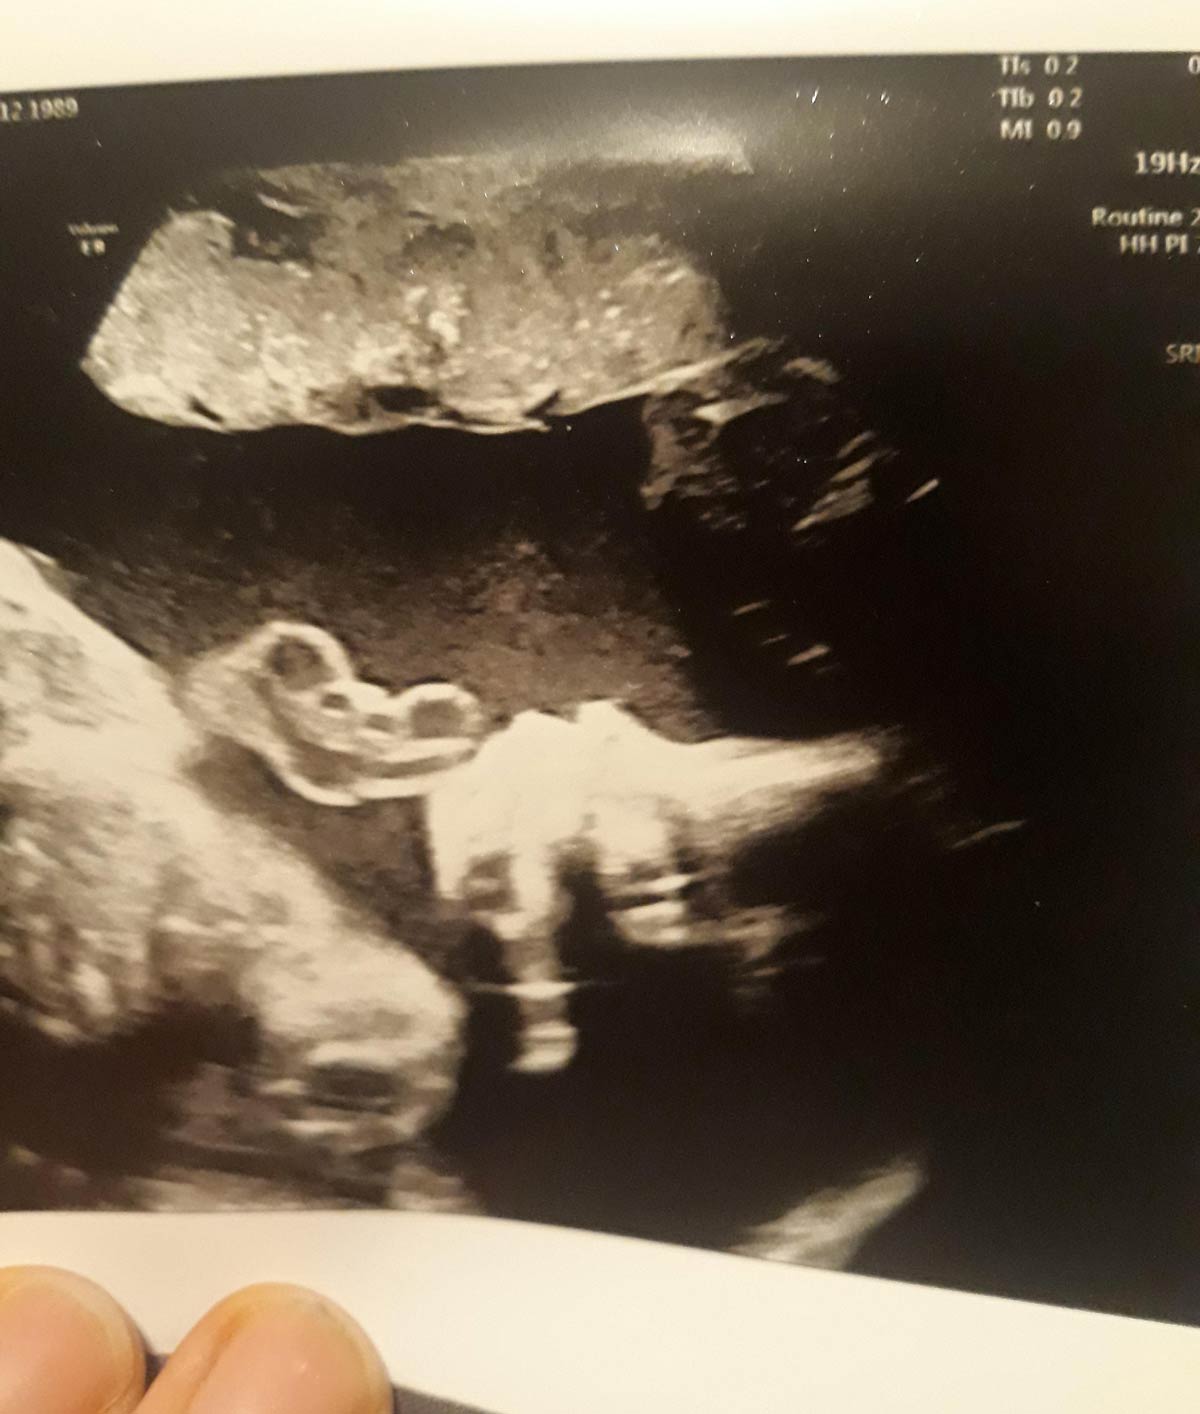 Went for a baby scan today, we already have a boy and a girl, the third is going to be a... dinosaur?!